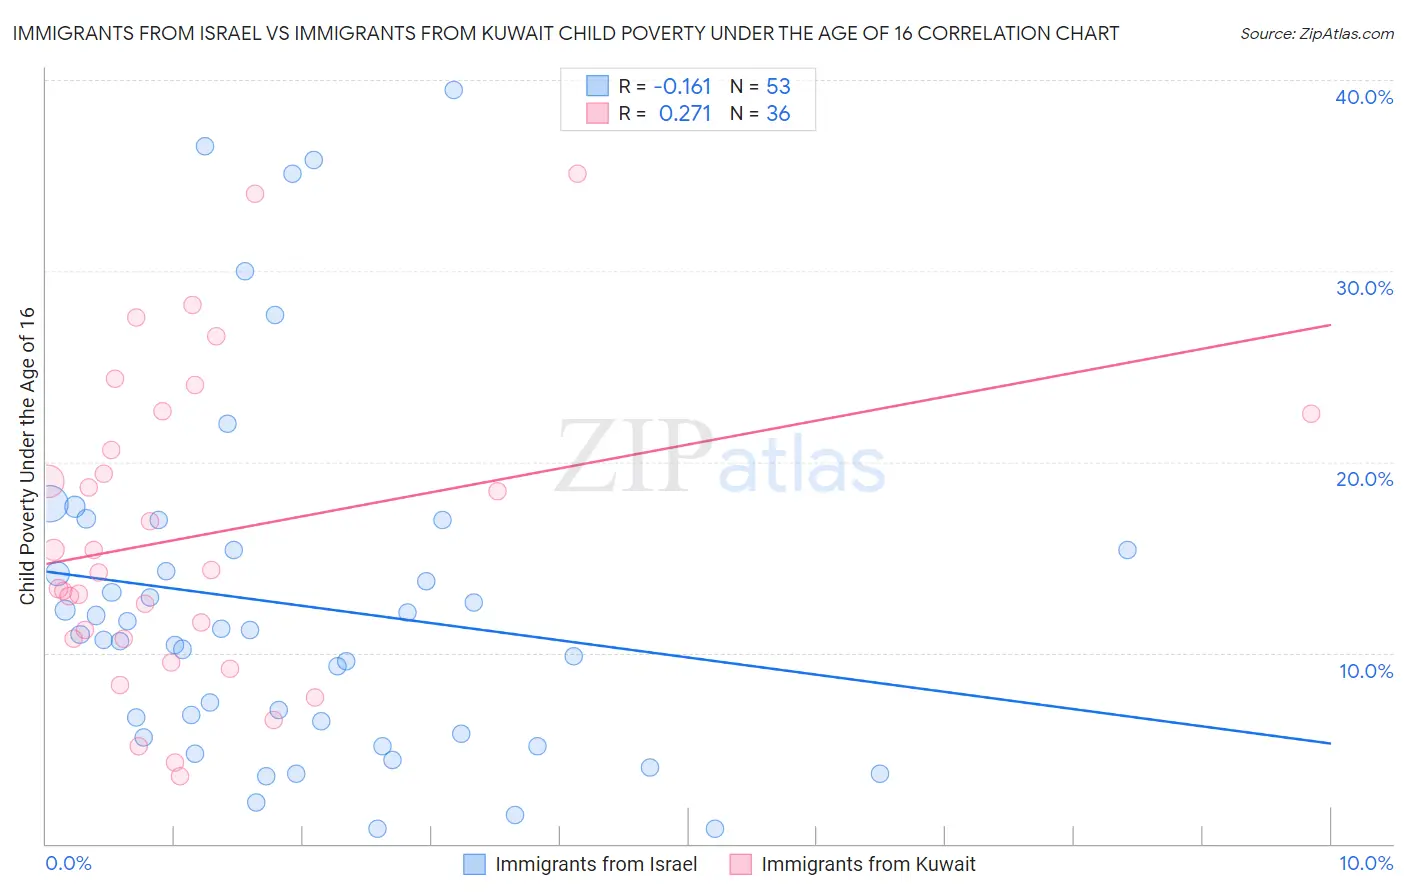 Immigrants from Israel vs Immigrants from Kuwait Child Poverty Under the Age of 16